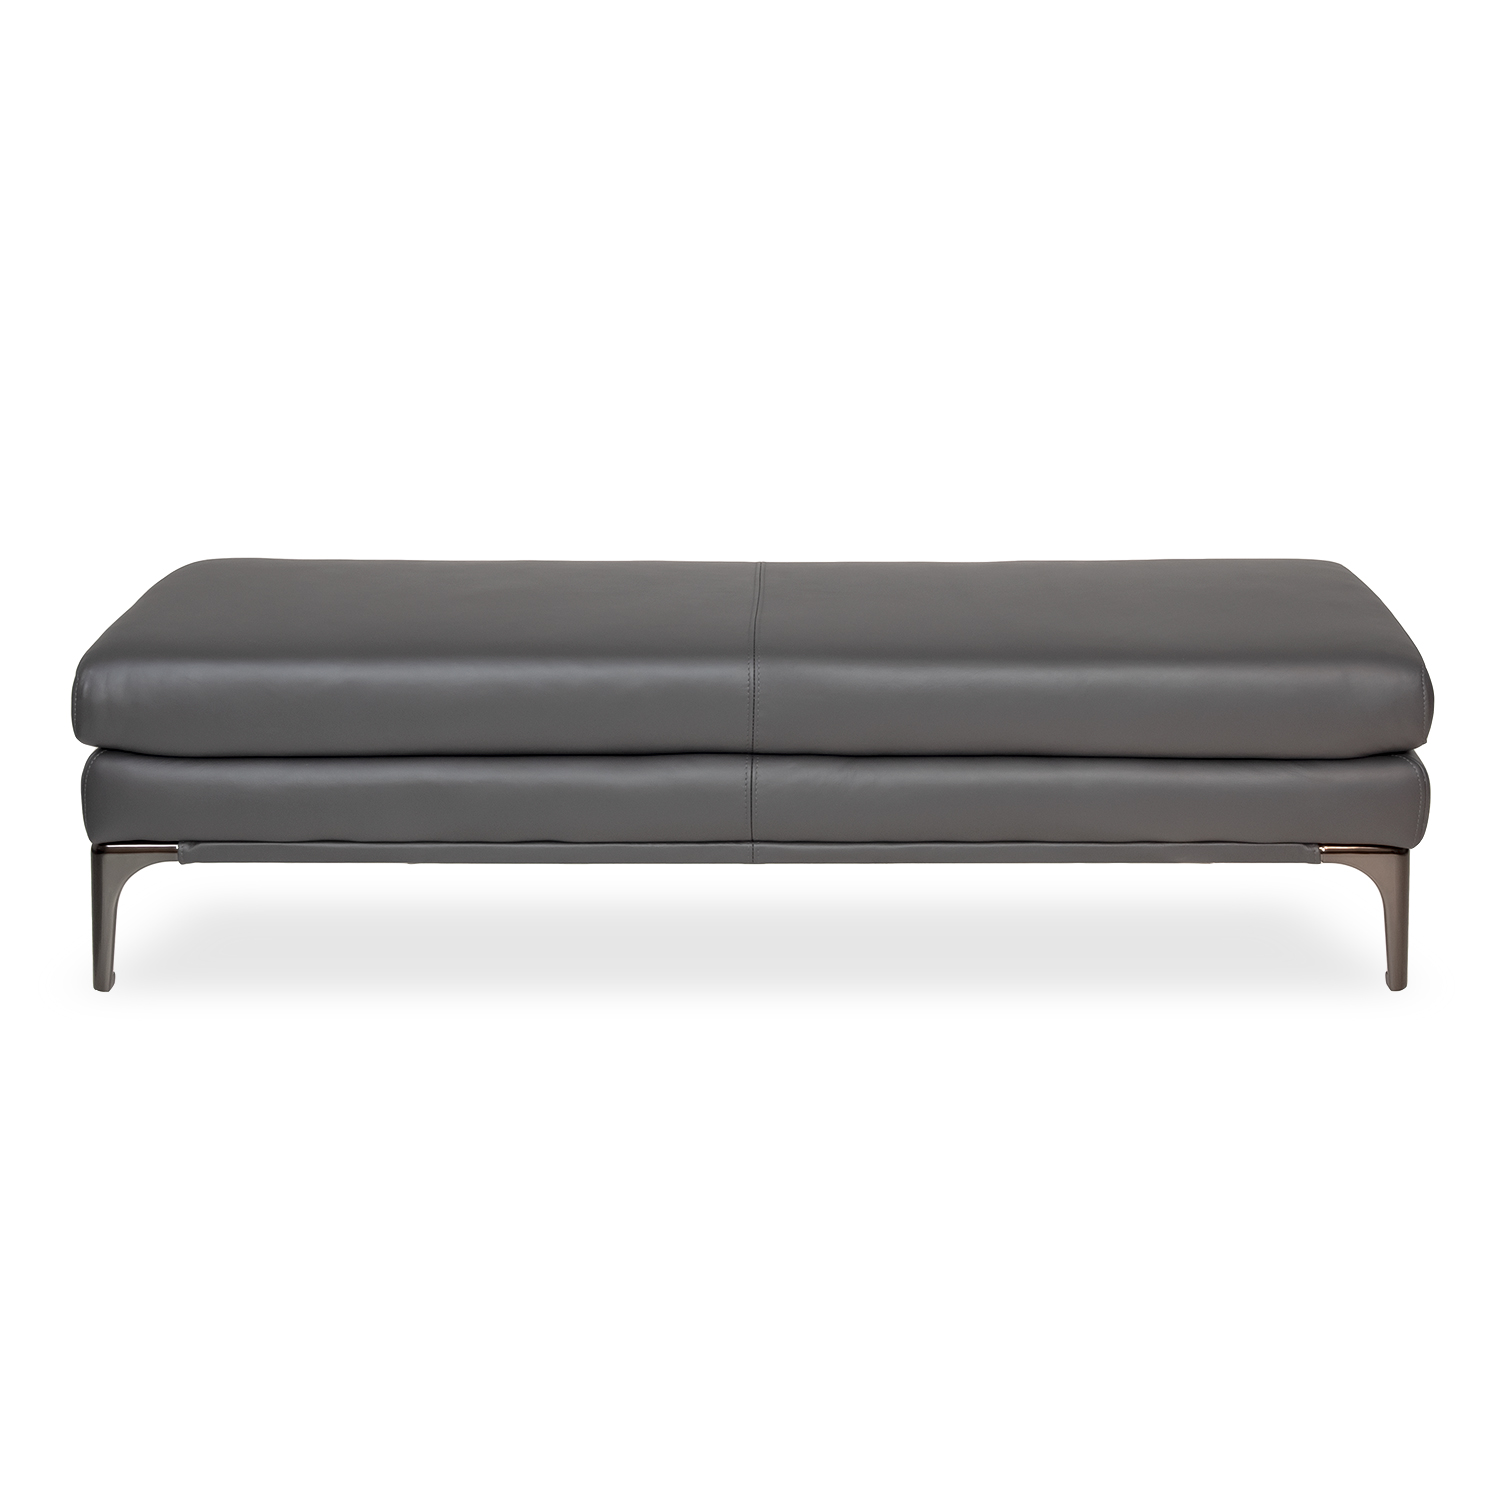 Allure Bench Shale